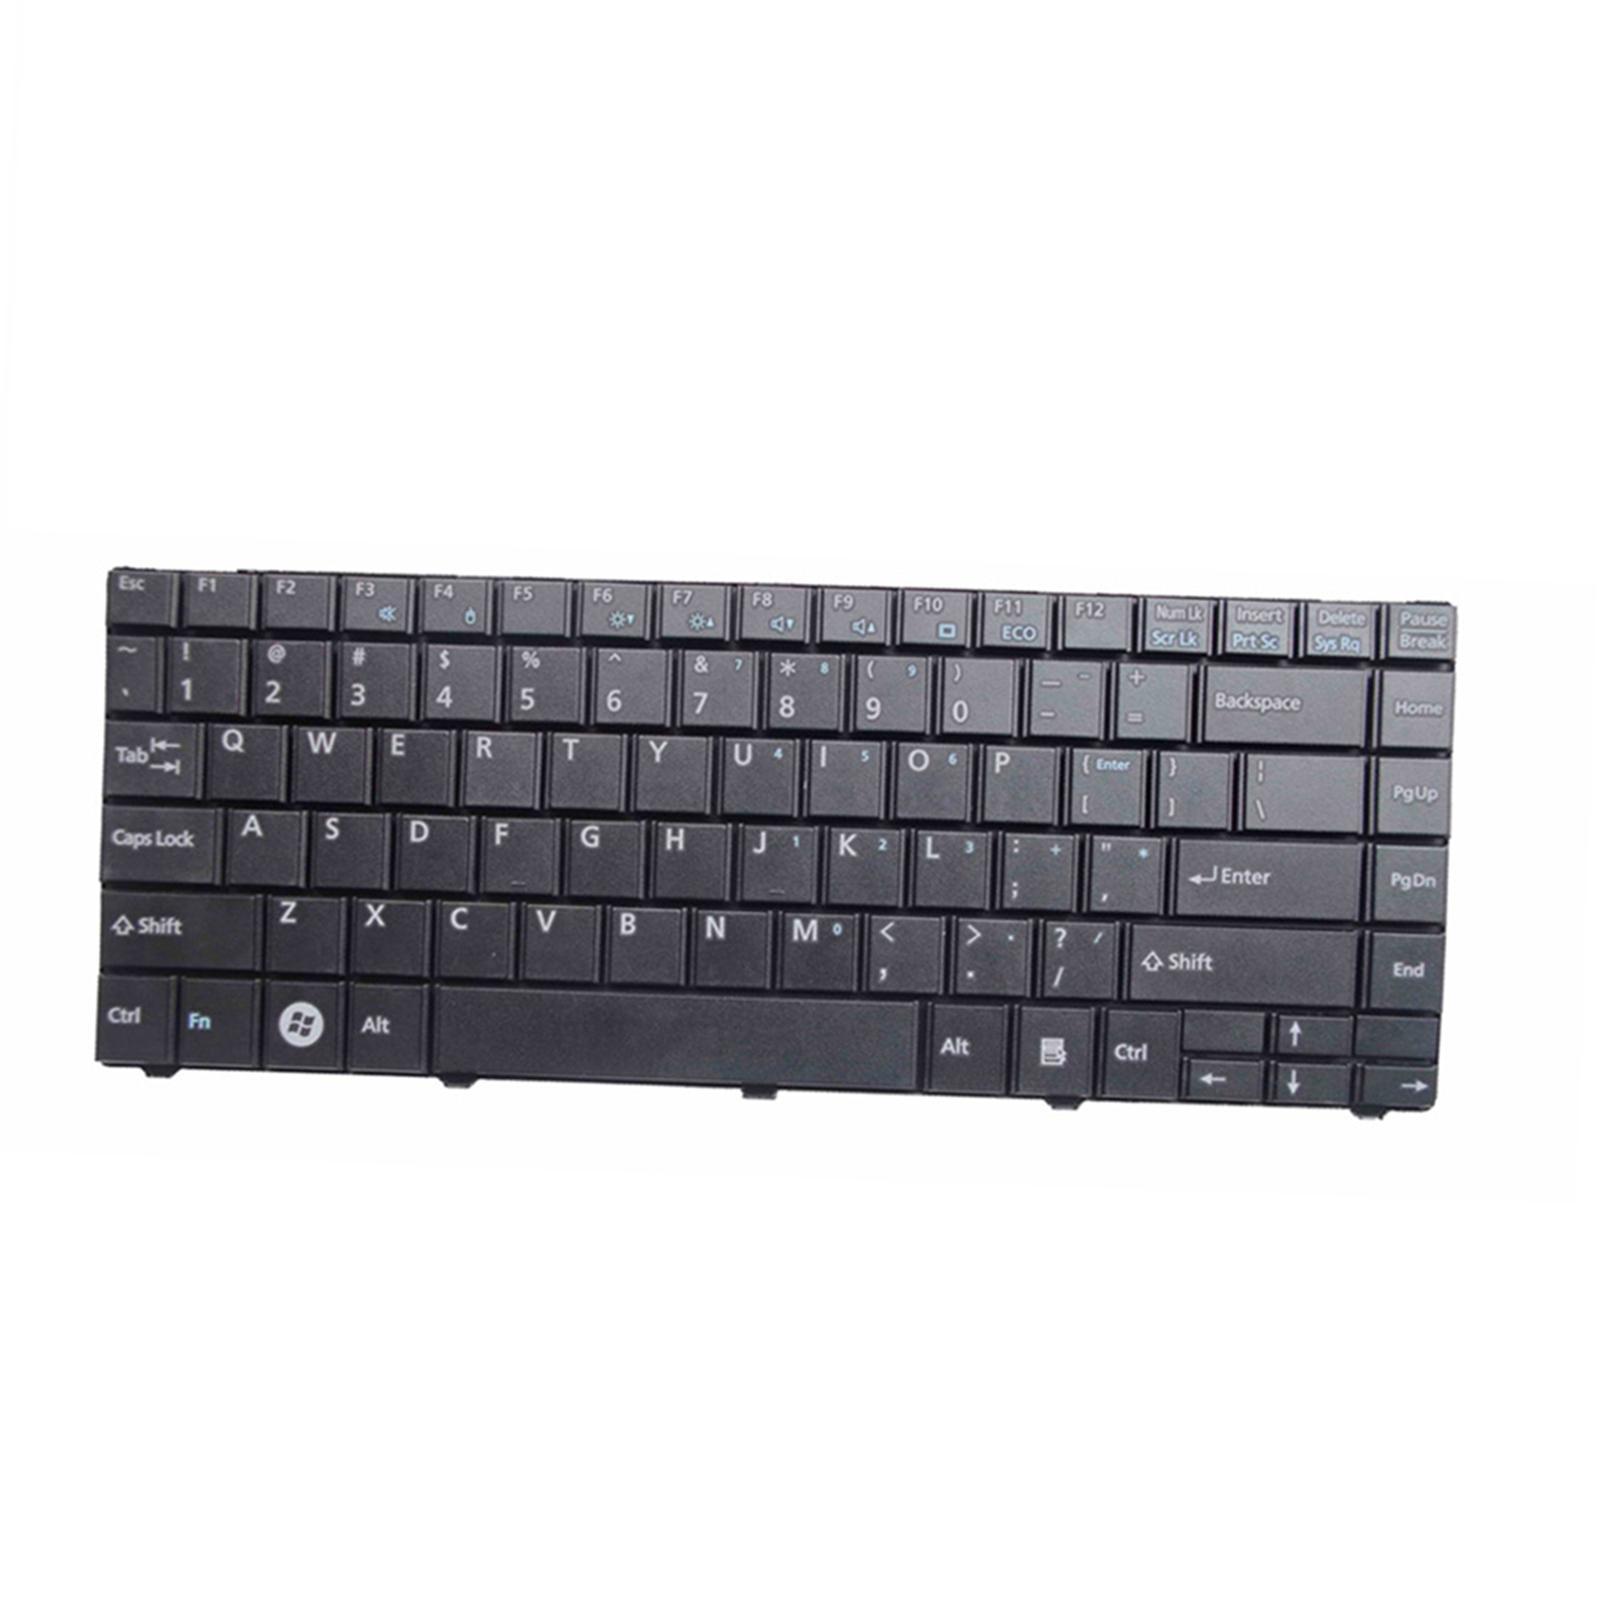 Keyboard Compact Portable for     LH531 BH531 LH701 Replace